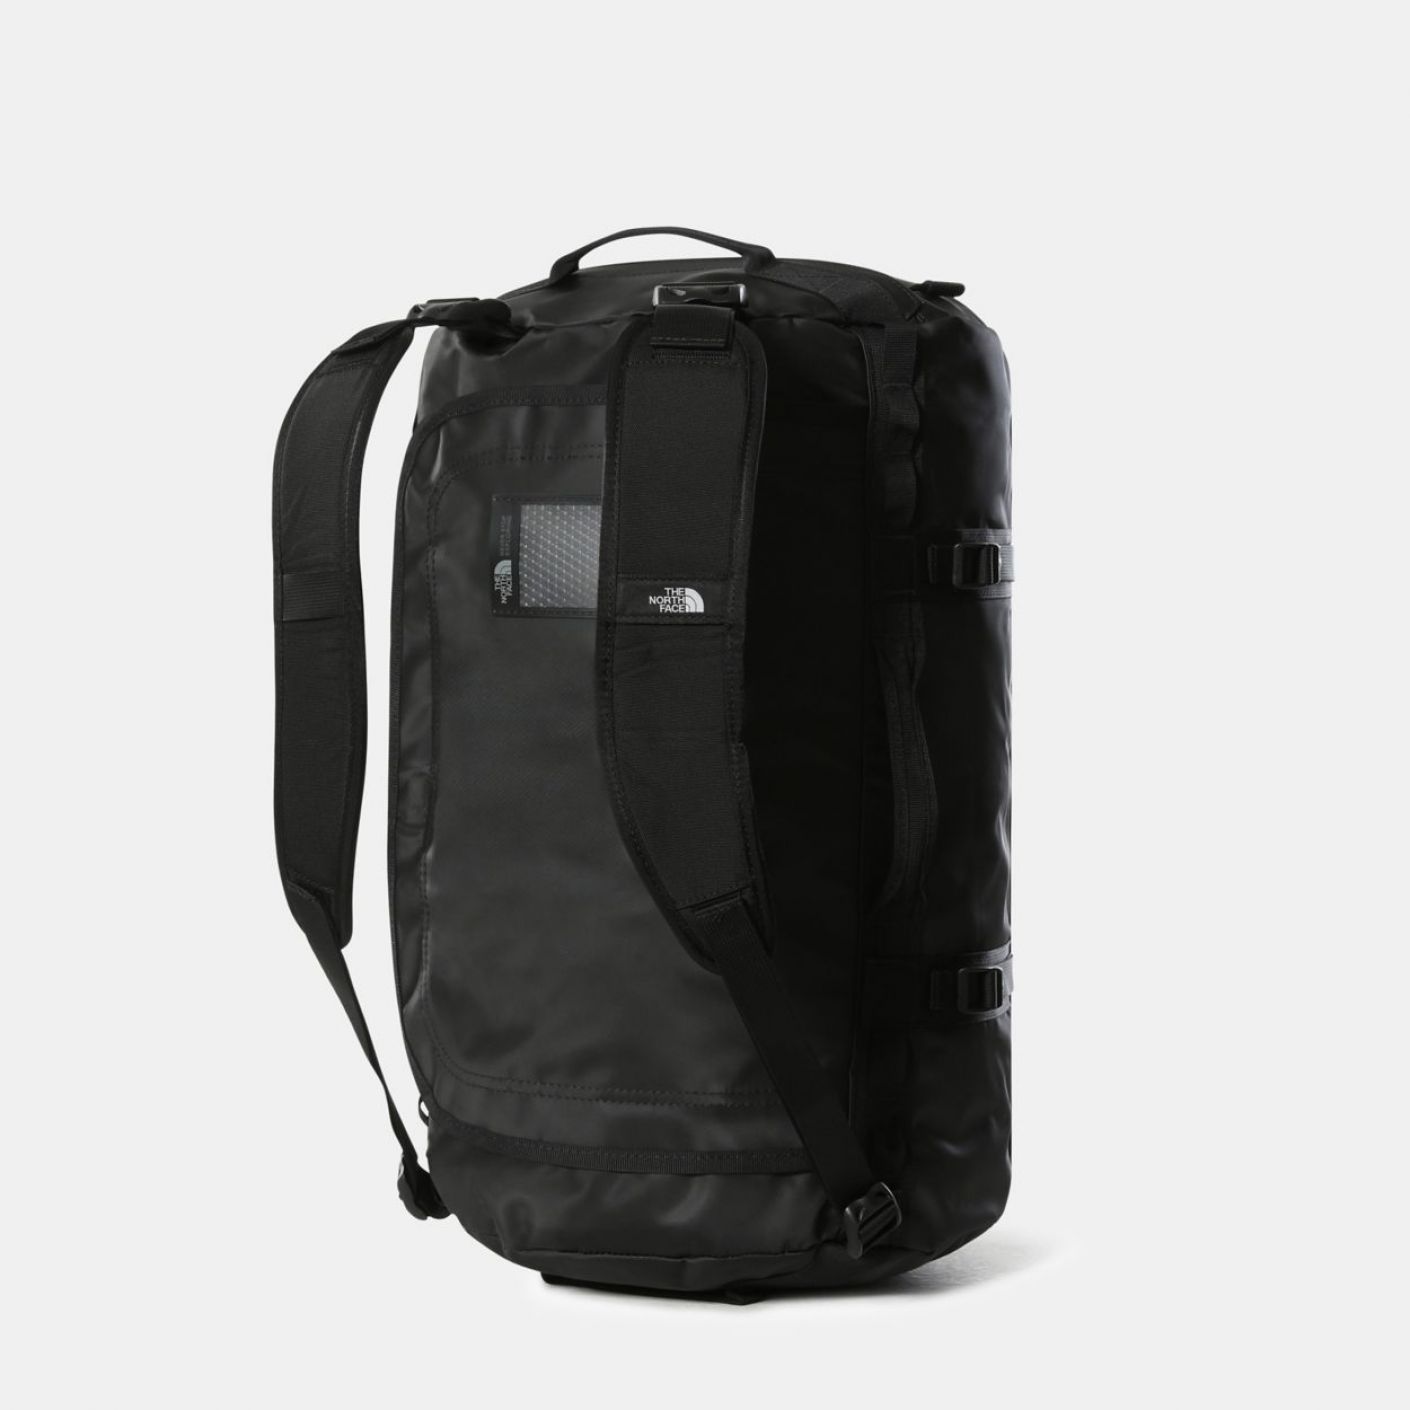 The North Face Base Camp Duffel S Black/White